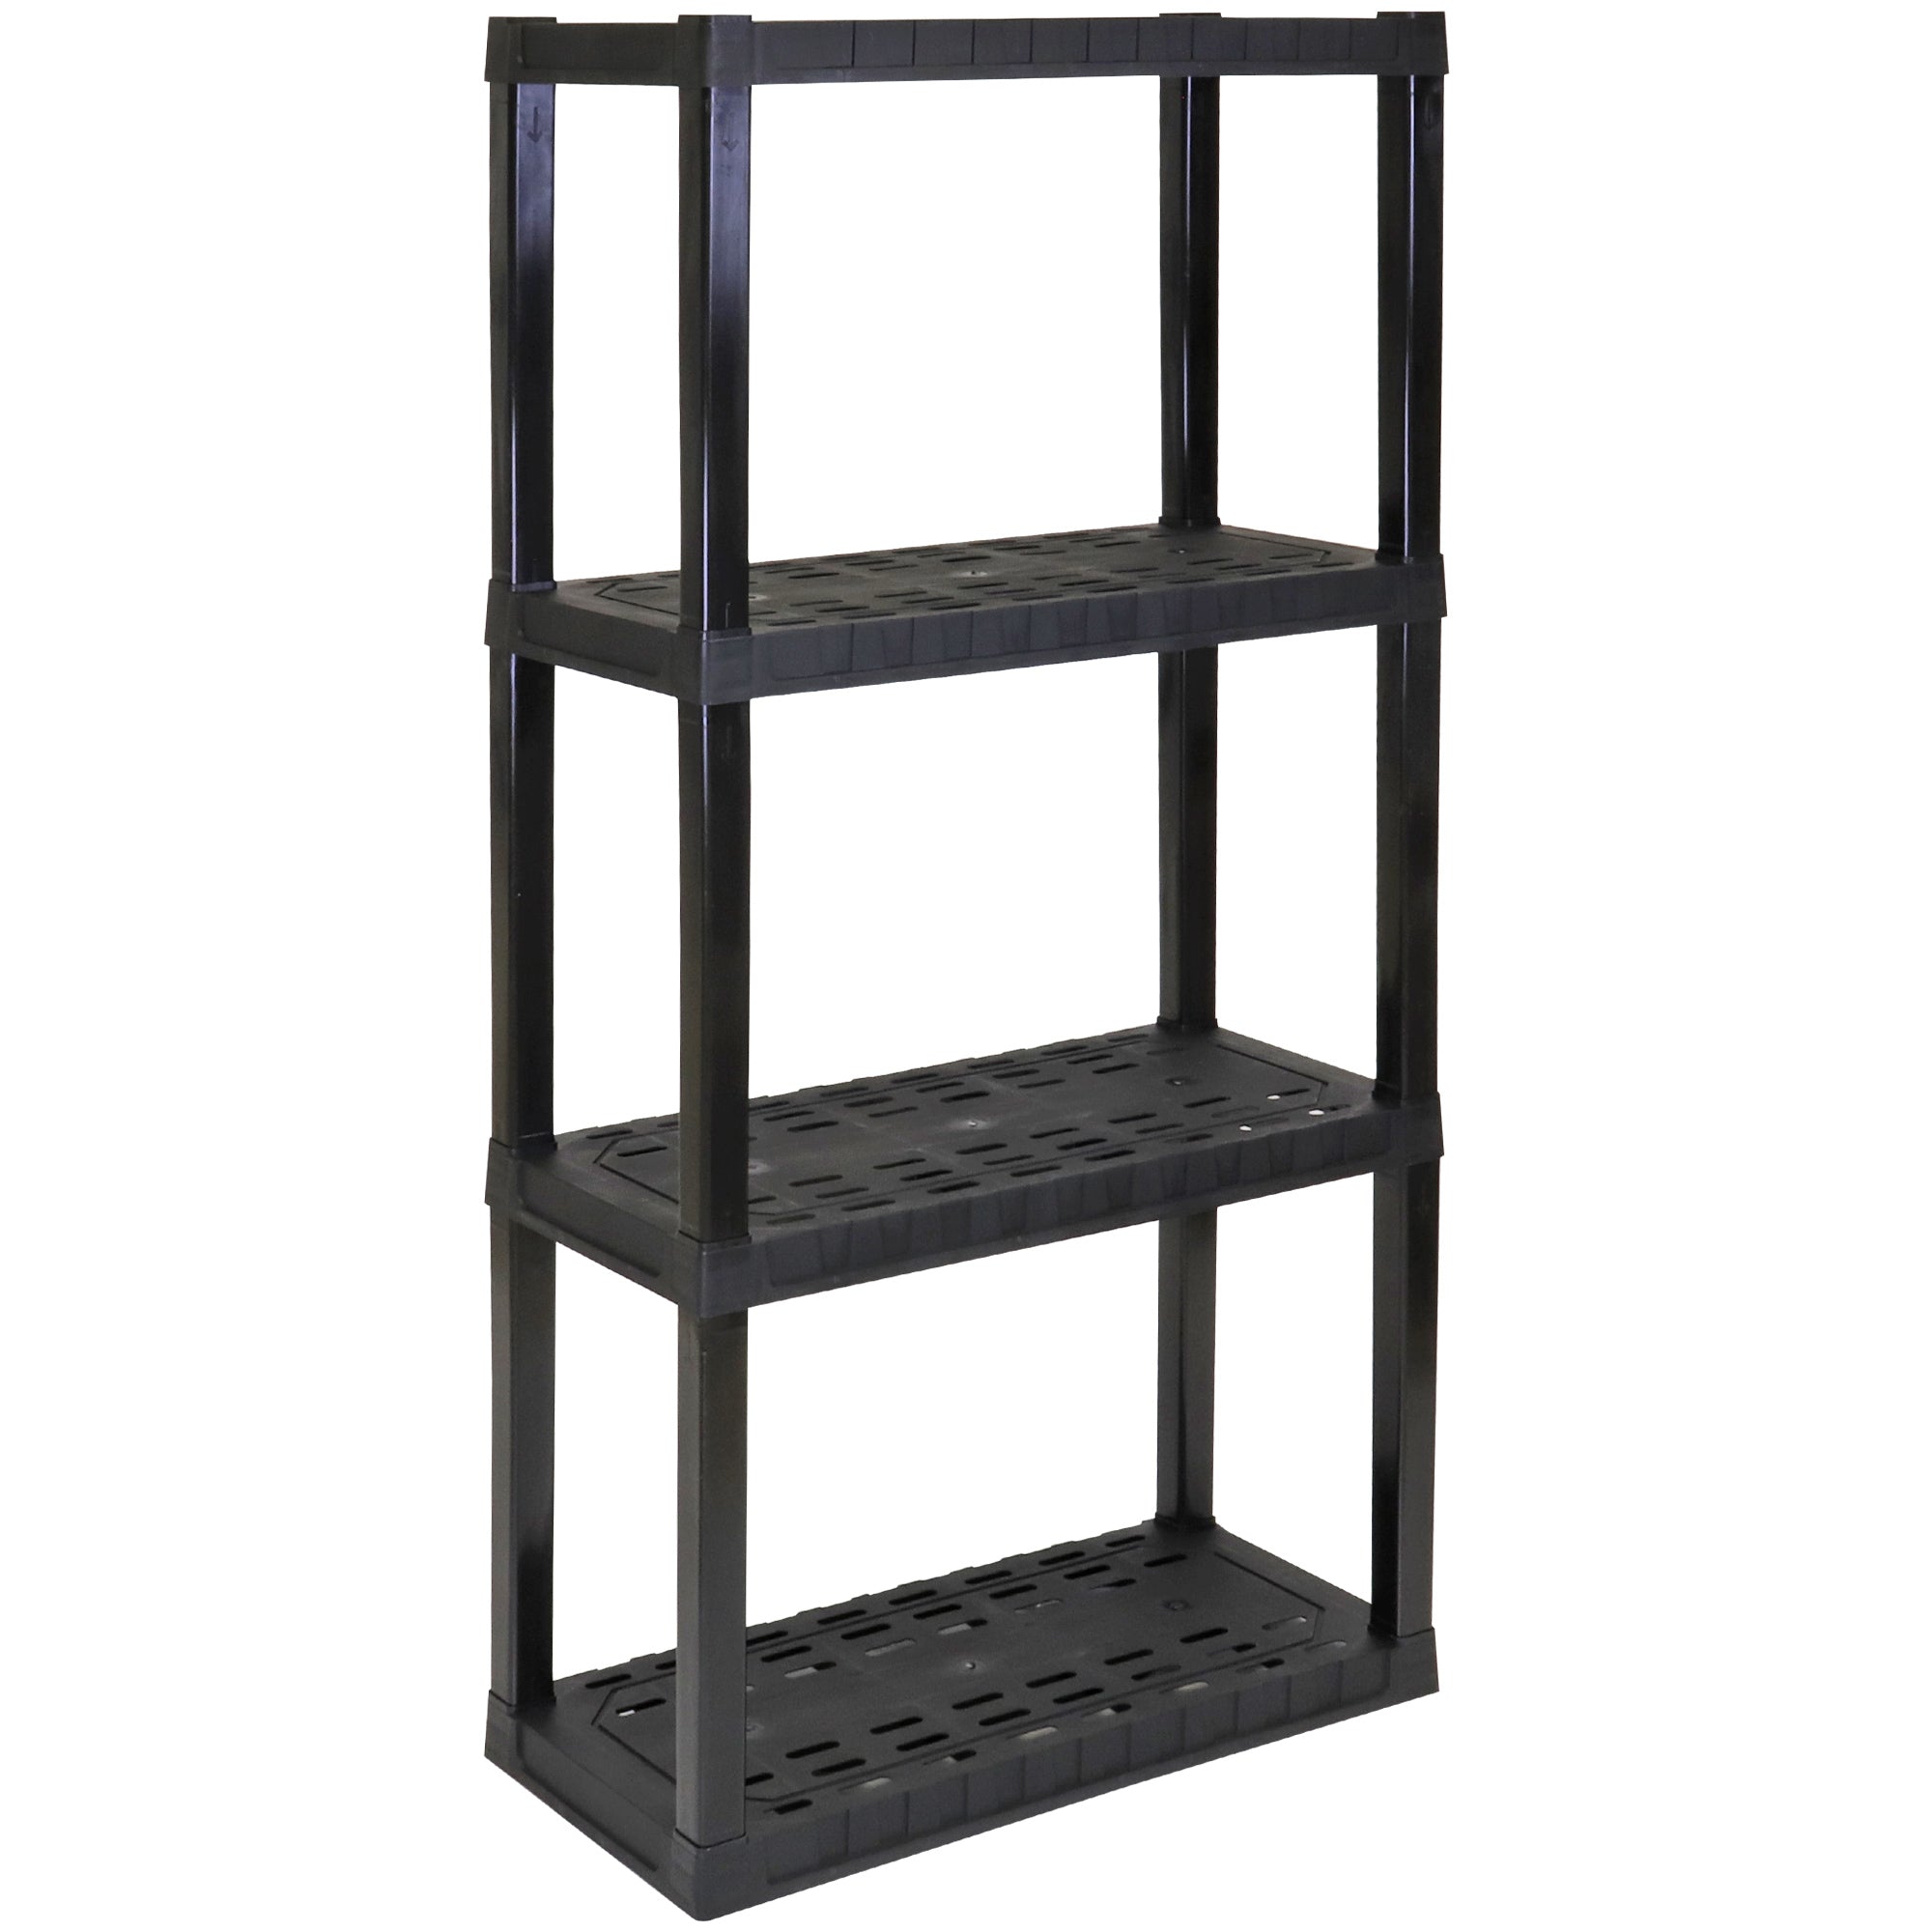 Oskar 4-Tier Storage Shelf, Holds 180 kg, H 145 X W 76 X D 36 CM, Multipurpose Organizer for Cellar, Basement, Utility Shed, Workshop, Tool-Free Assembly, Made With Recycled Materials, Black